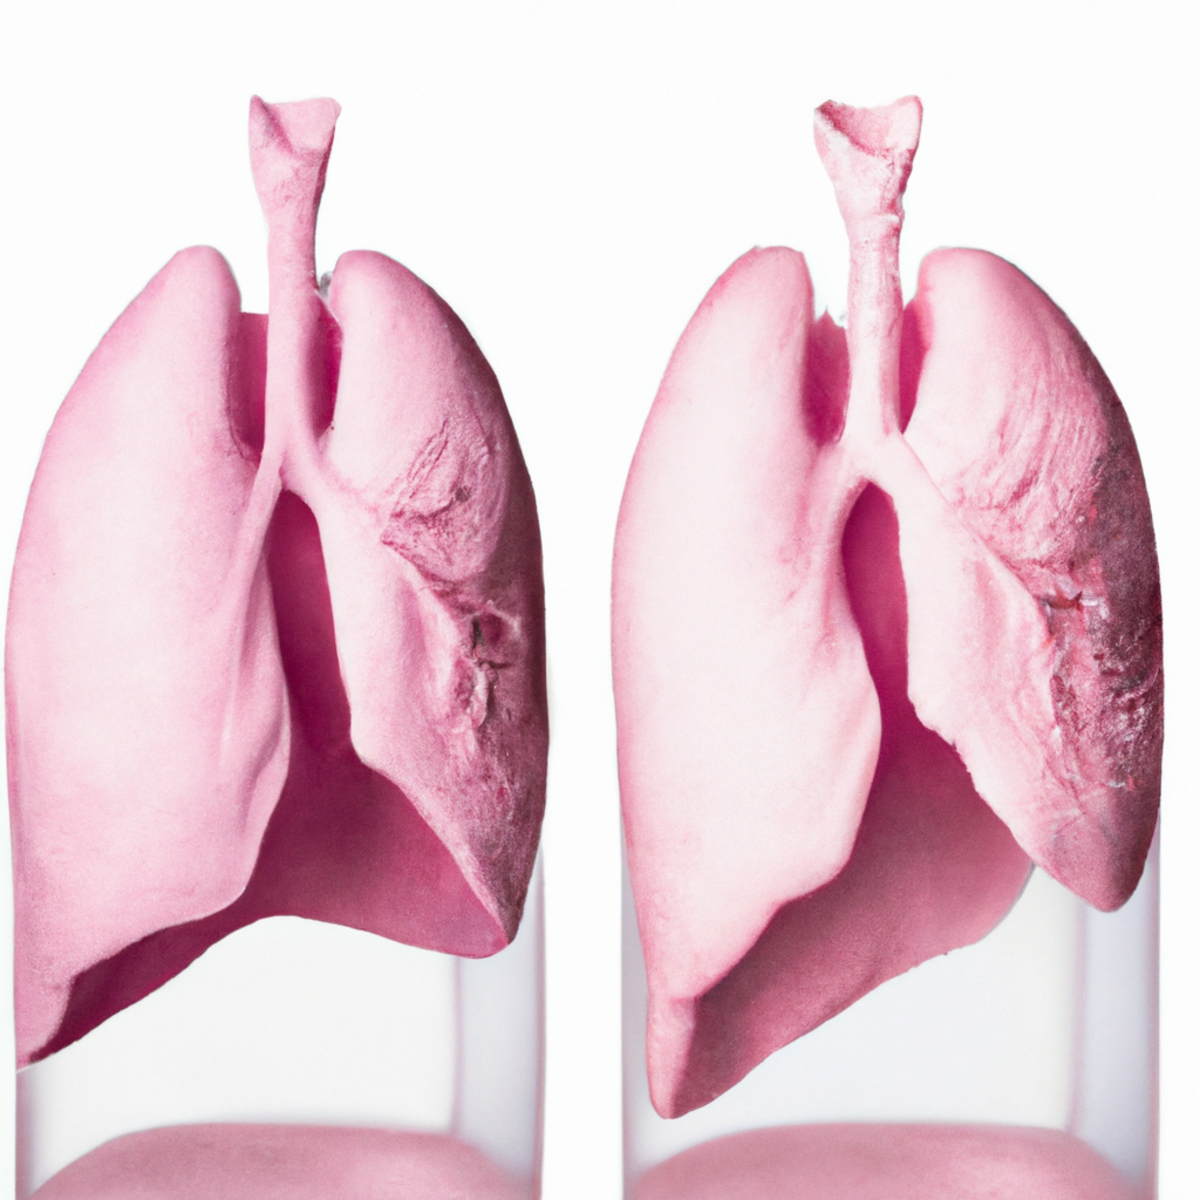 Healthy and Sarcoidosis-affected lungs in glass containers.